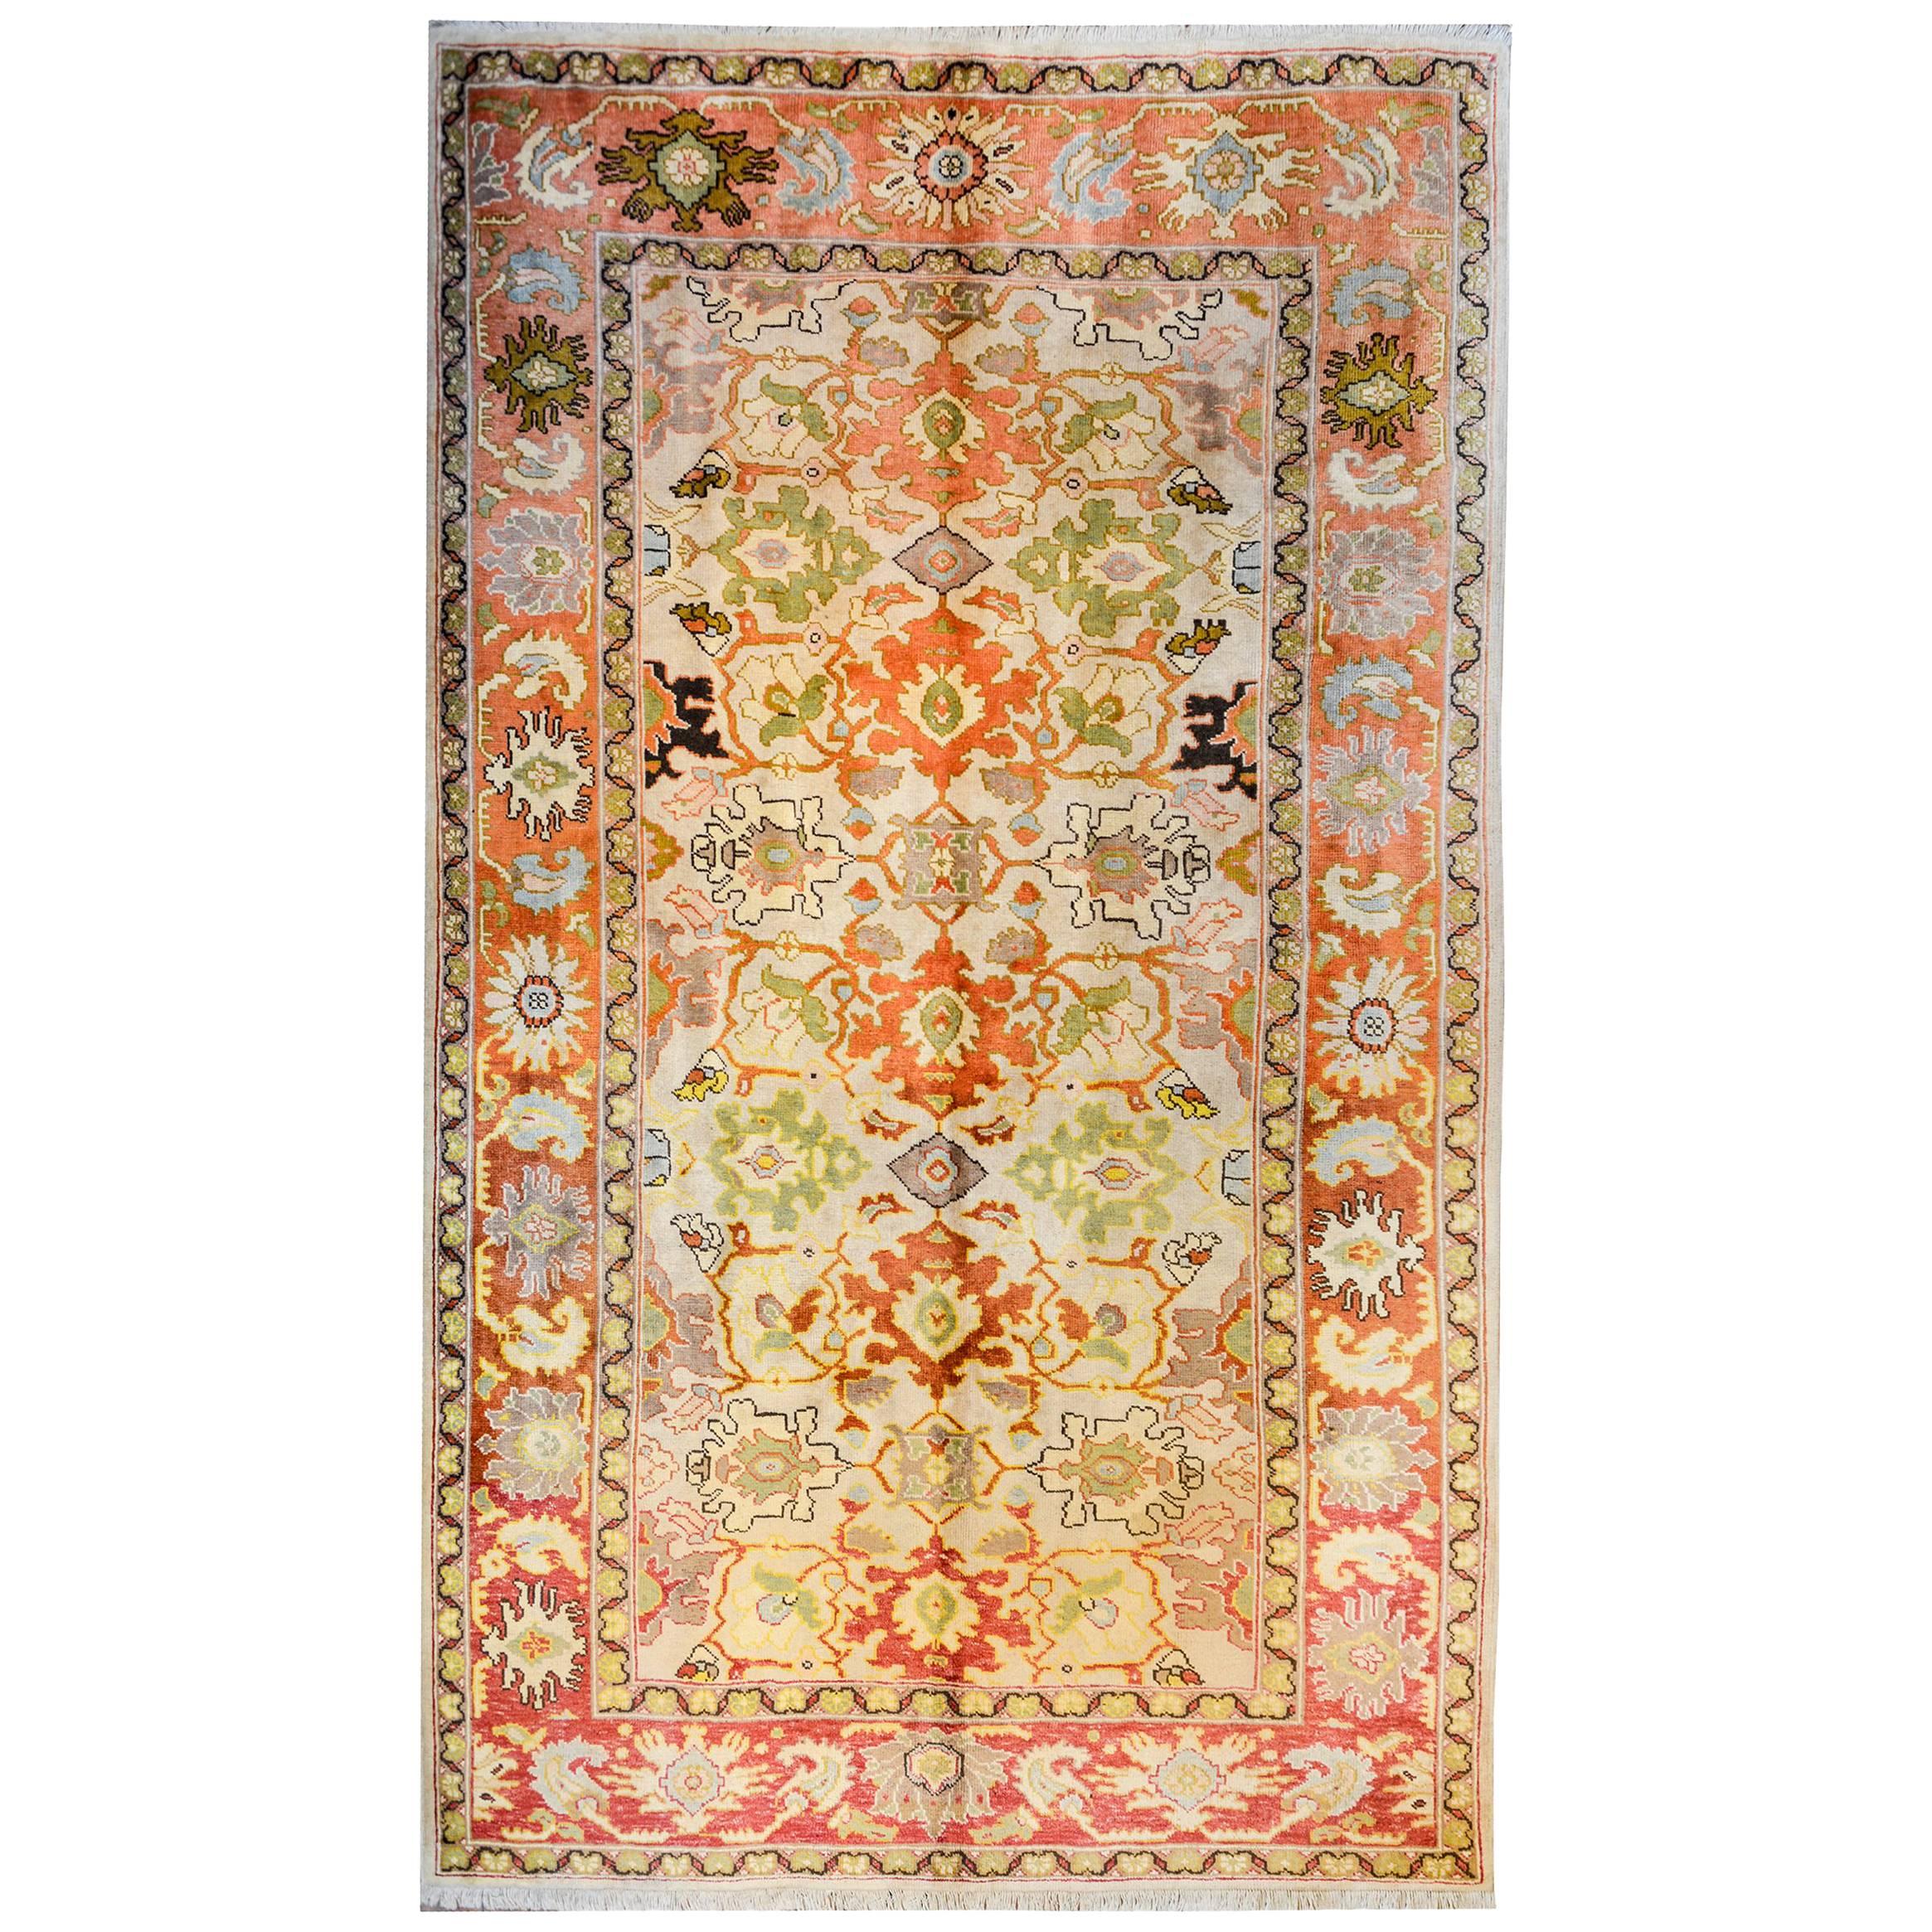 Wonderful Early 20th Century Sultanabad Rug